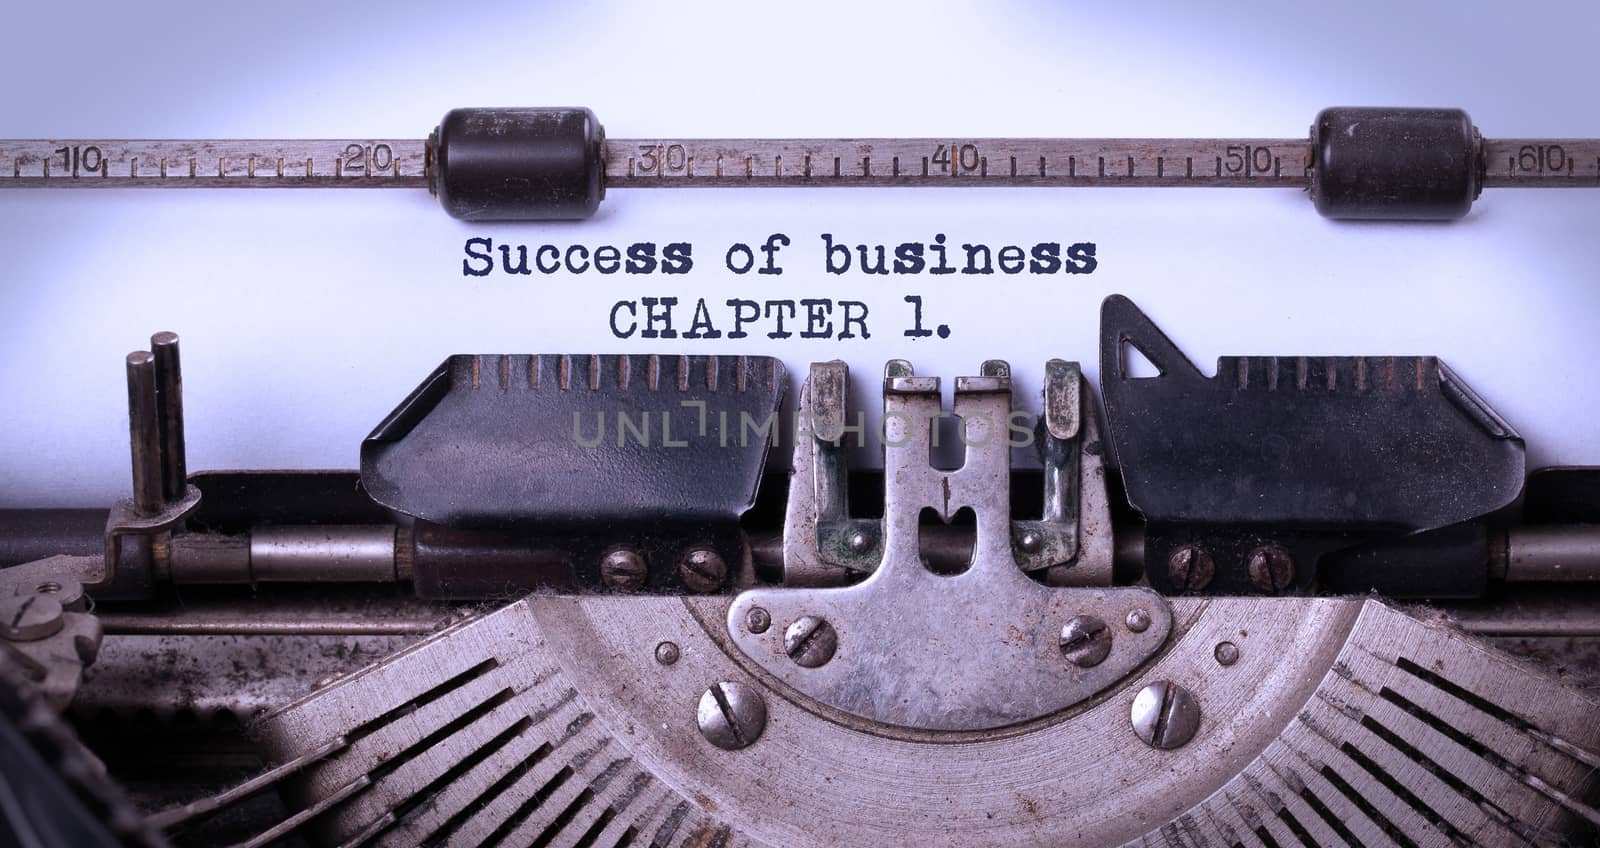 Vintage inscription made by old typewriter, success of business, chapter 1